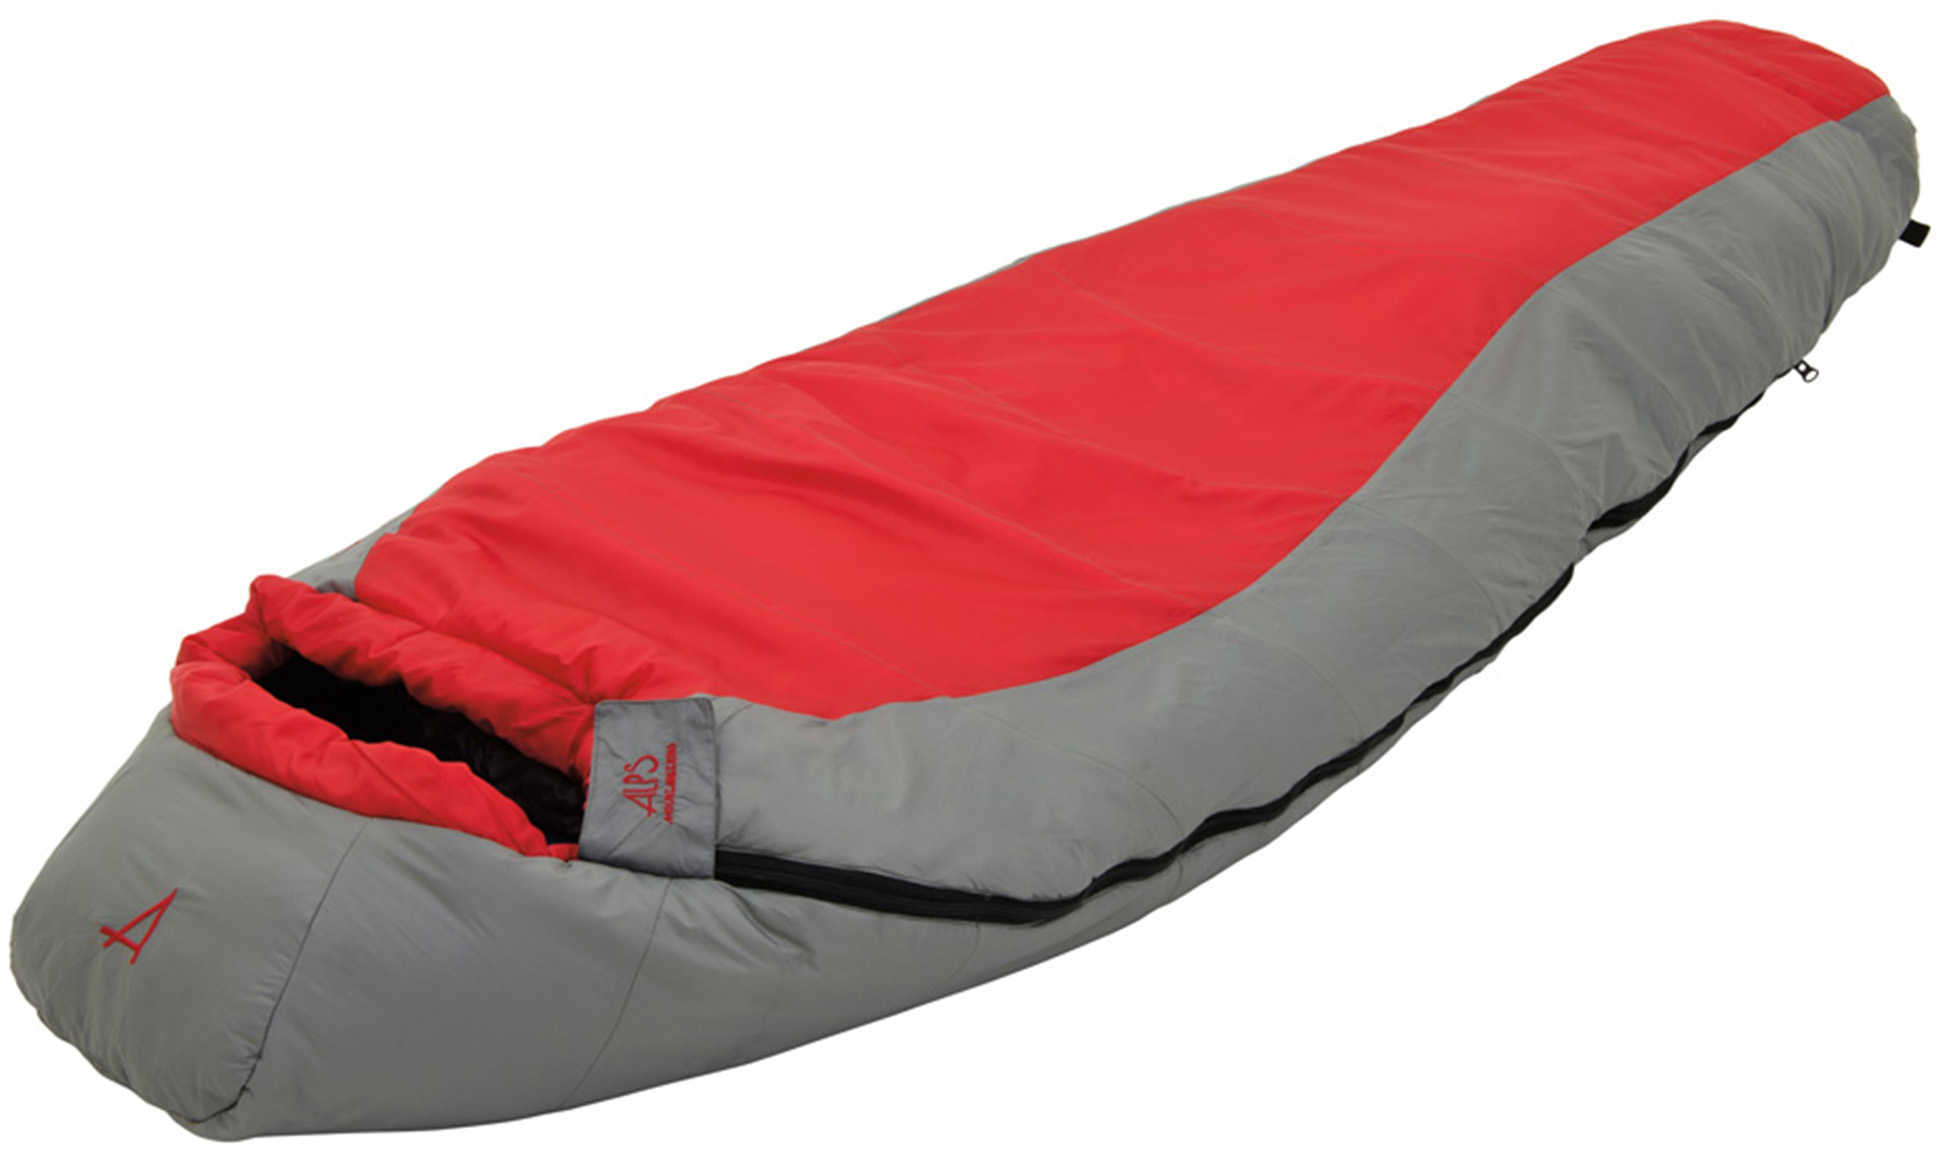 Alps Mountaineering Red Creek +30°, Long, Scarlet/Gray Md: 4502424